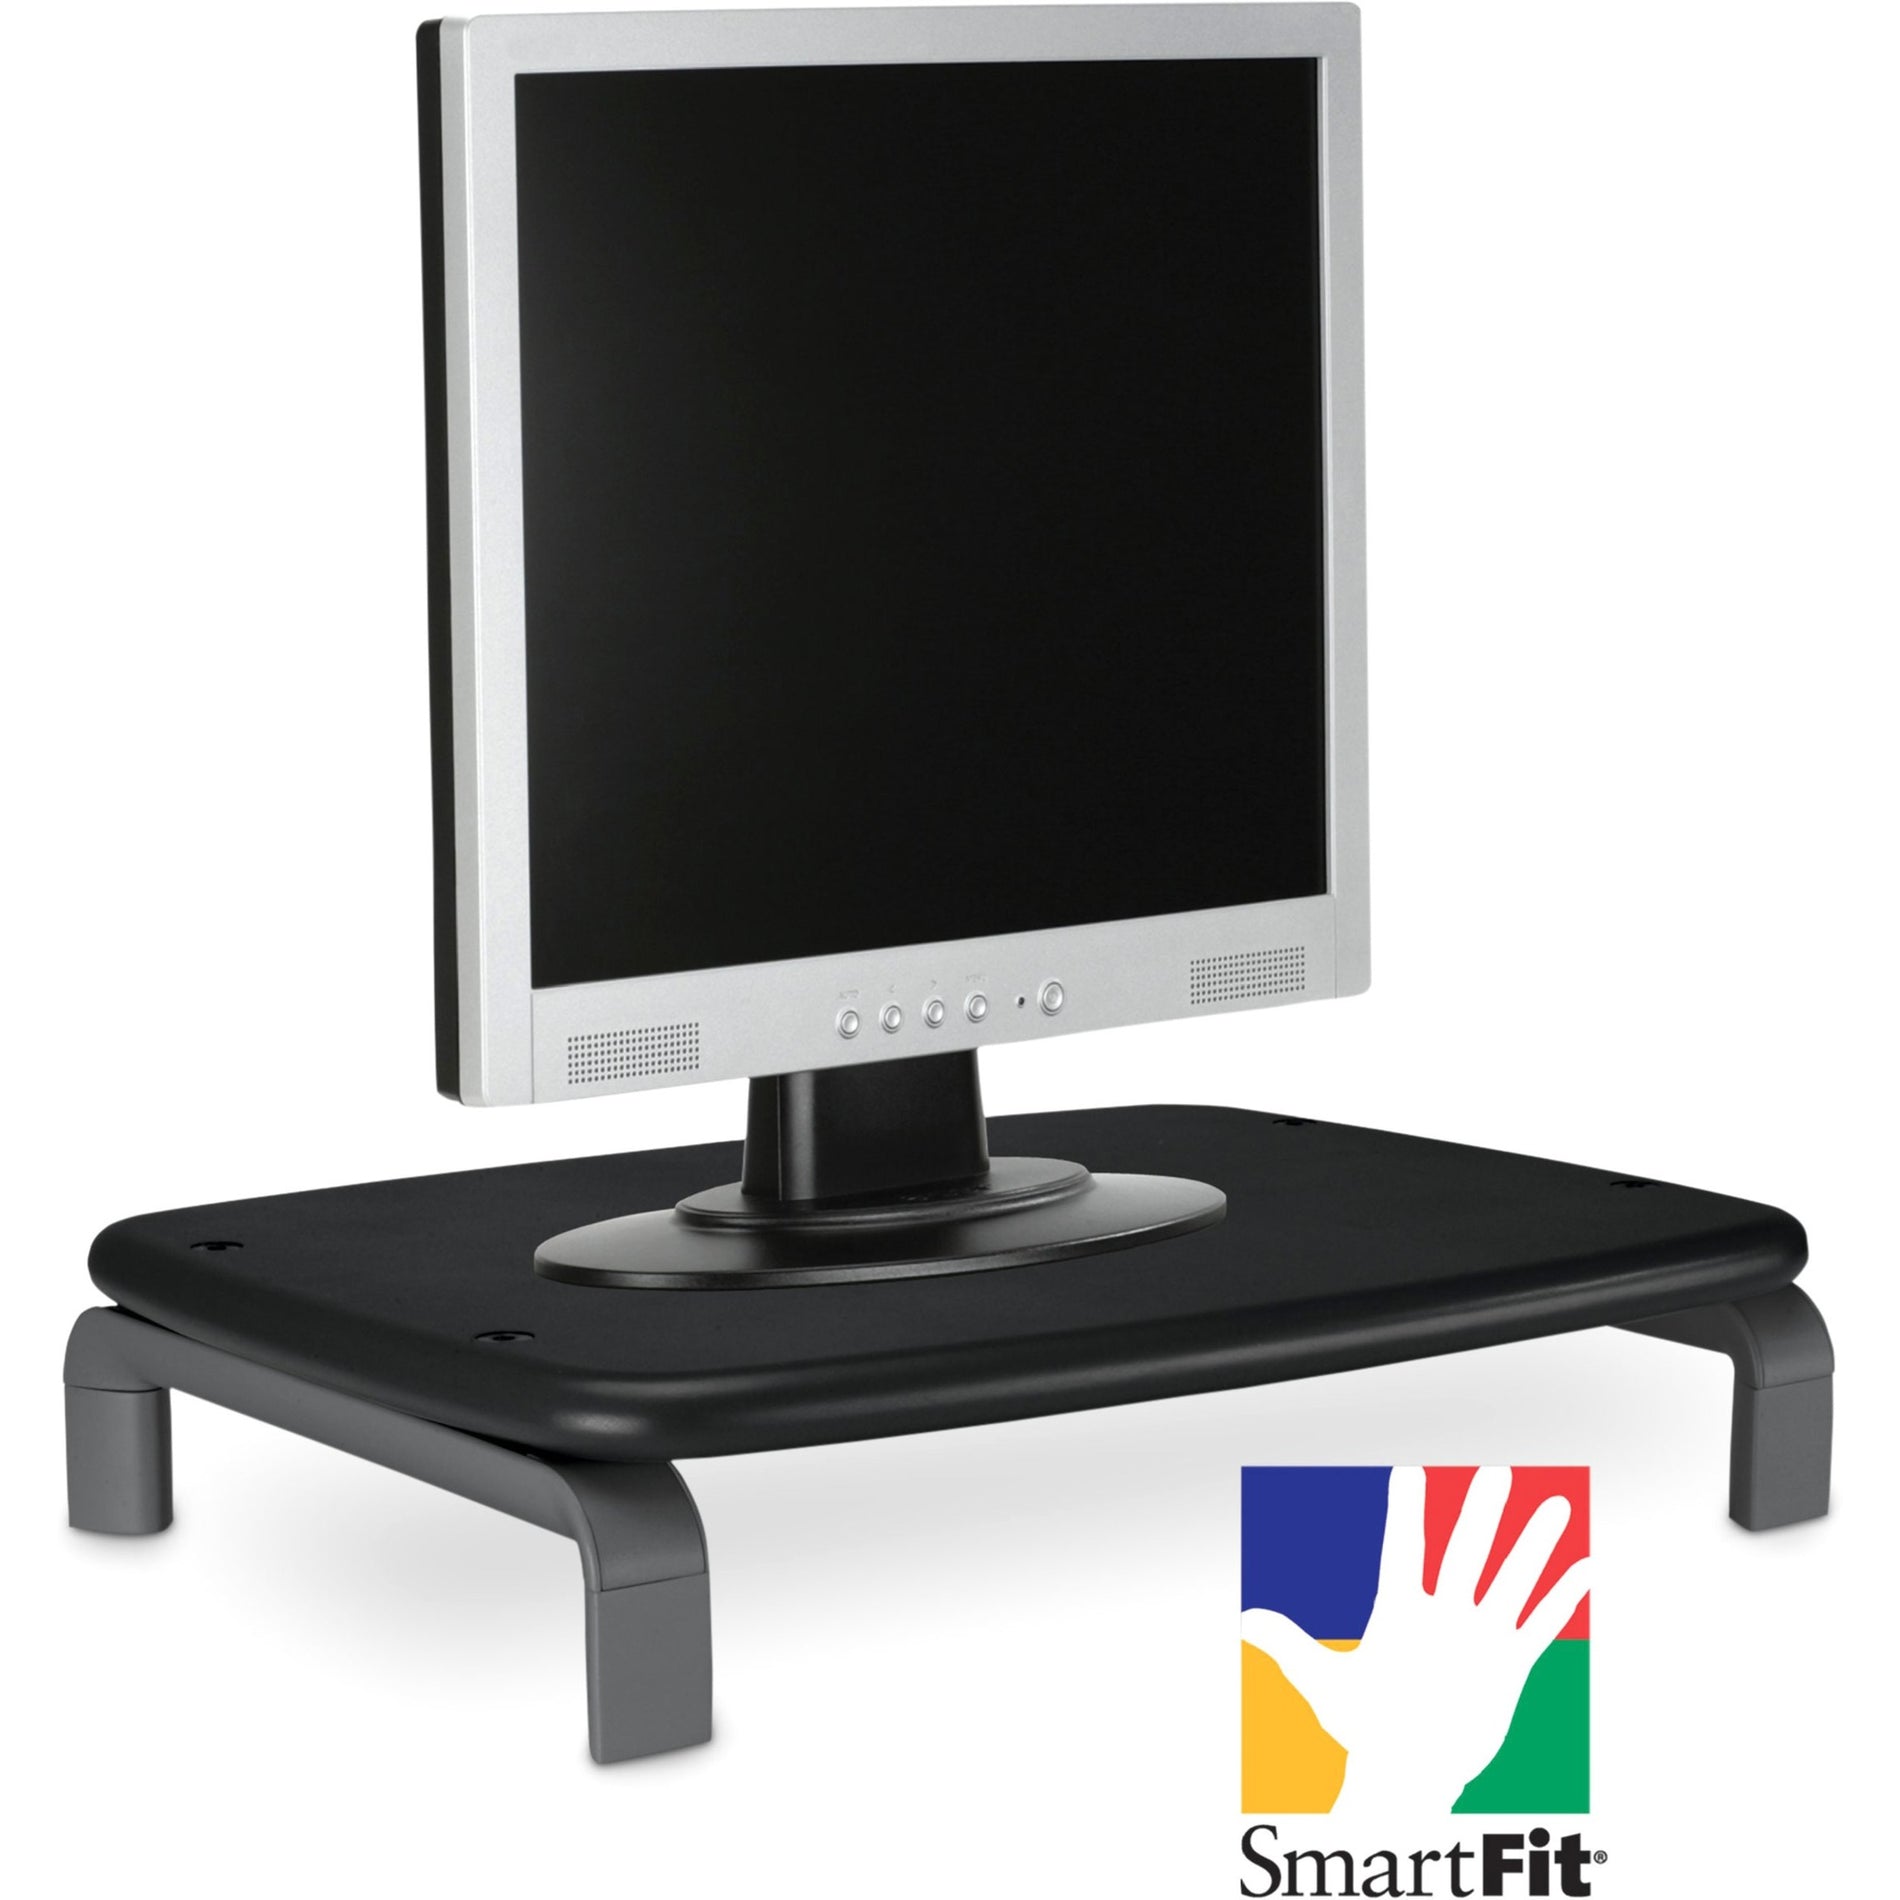 Kensington K60087F Monitor Stand with SmartFit System, Comfortable, Storage Space, 80 lb Load Capacity